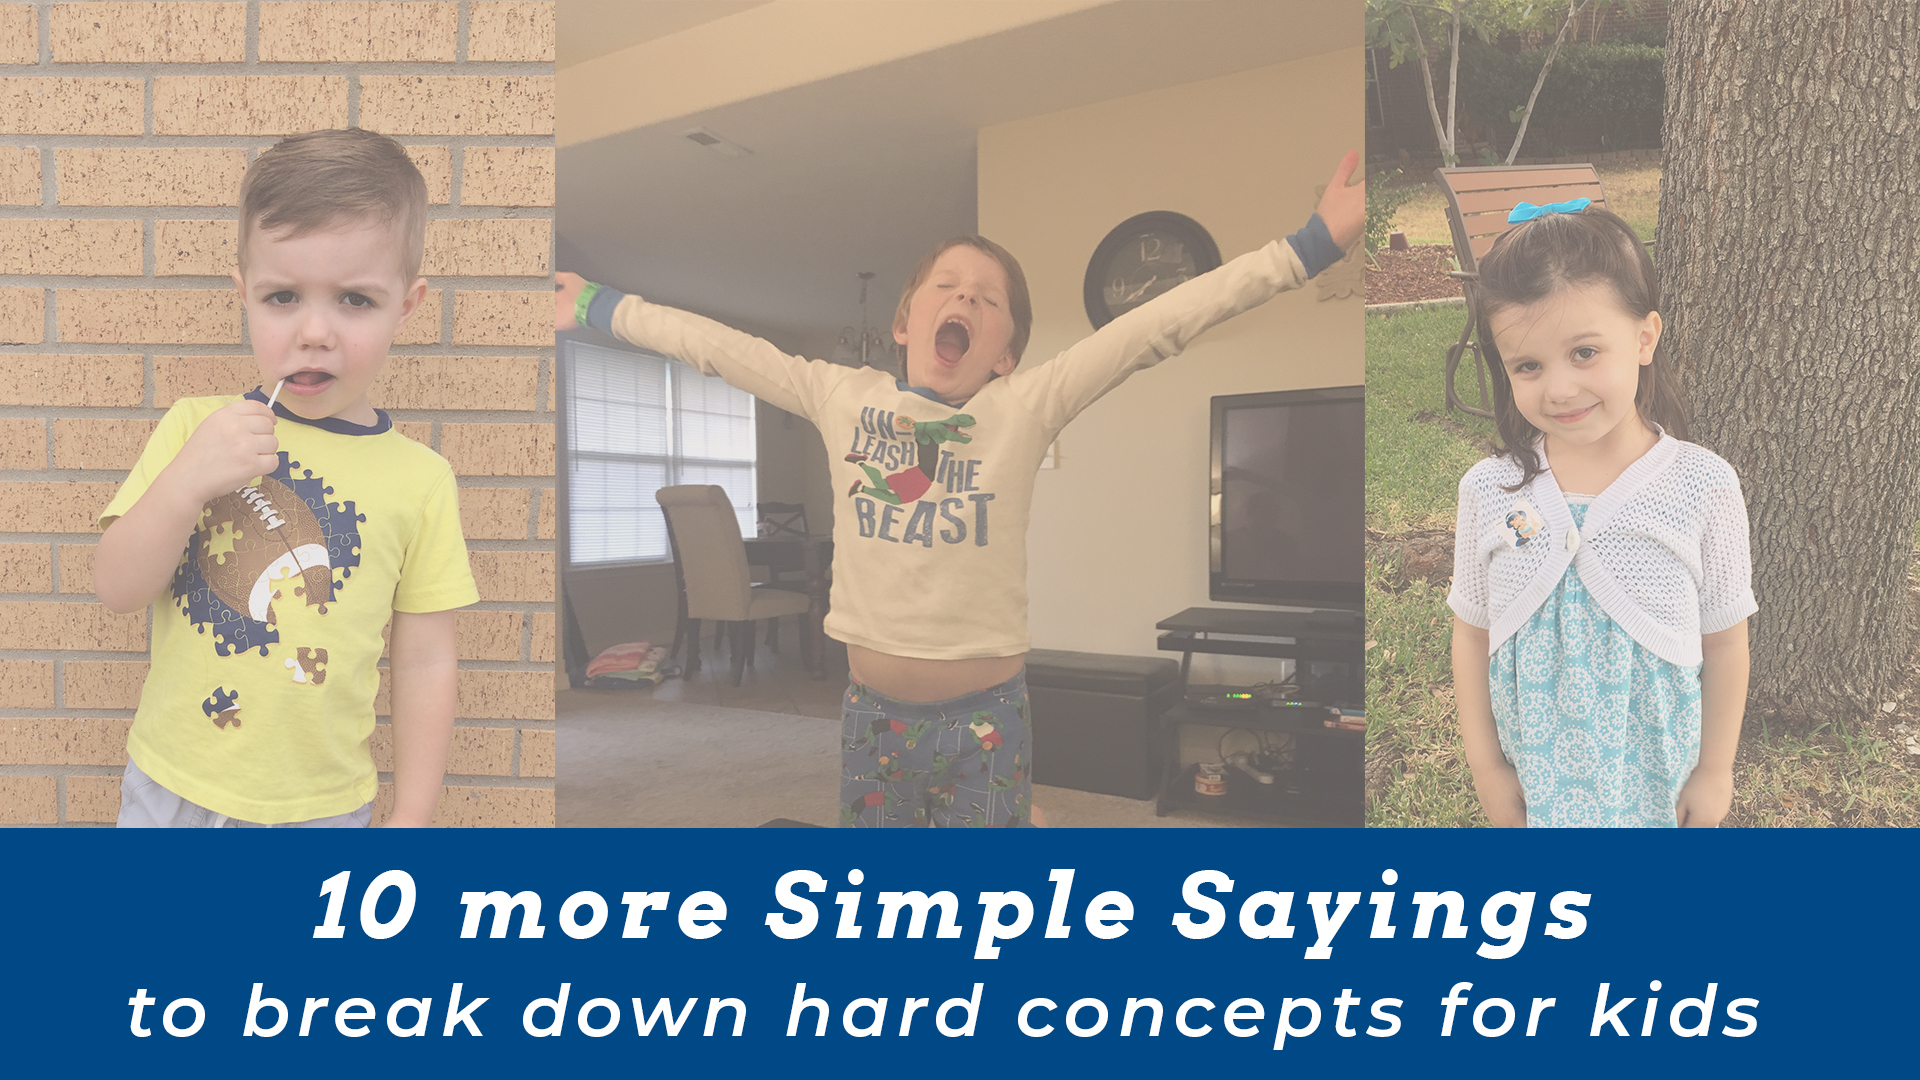 Instead of exhausting ourselves and our children, we can use simple sayings that break down hard sayings into more relatable and actionable bites. Ironically, breaking the concept down tends to give us, as parents, a little more compassion for our children. Instead of being annoyed by their mistakes, we begin to see them as life-lessons with which we can assist.